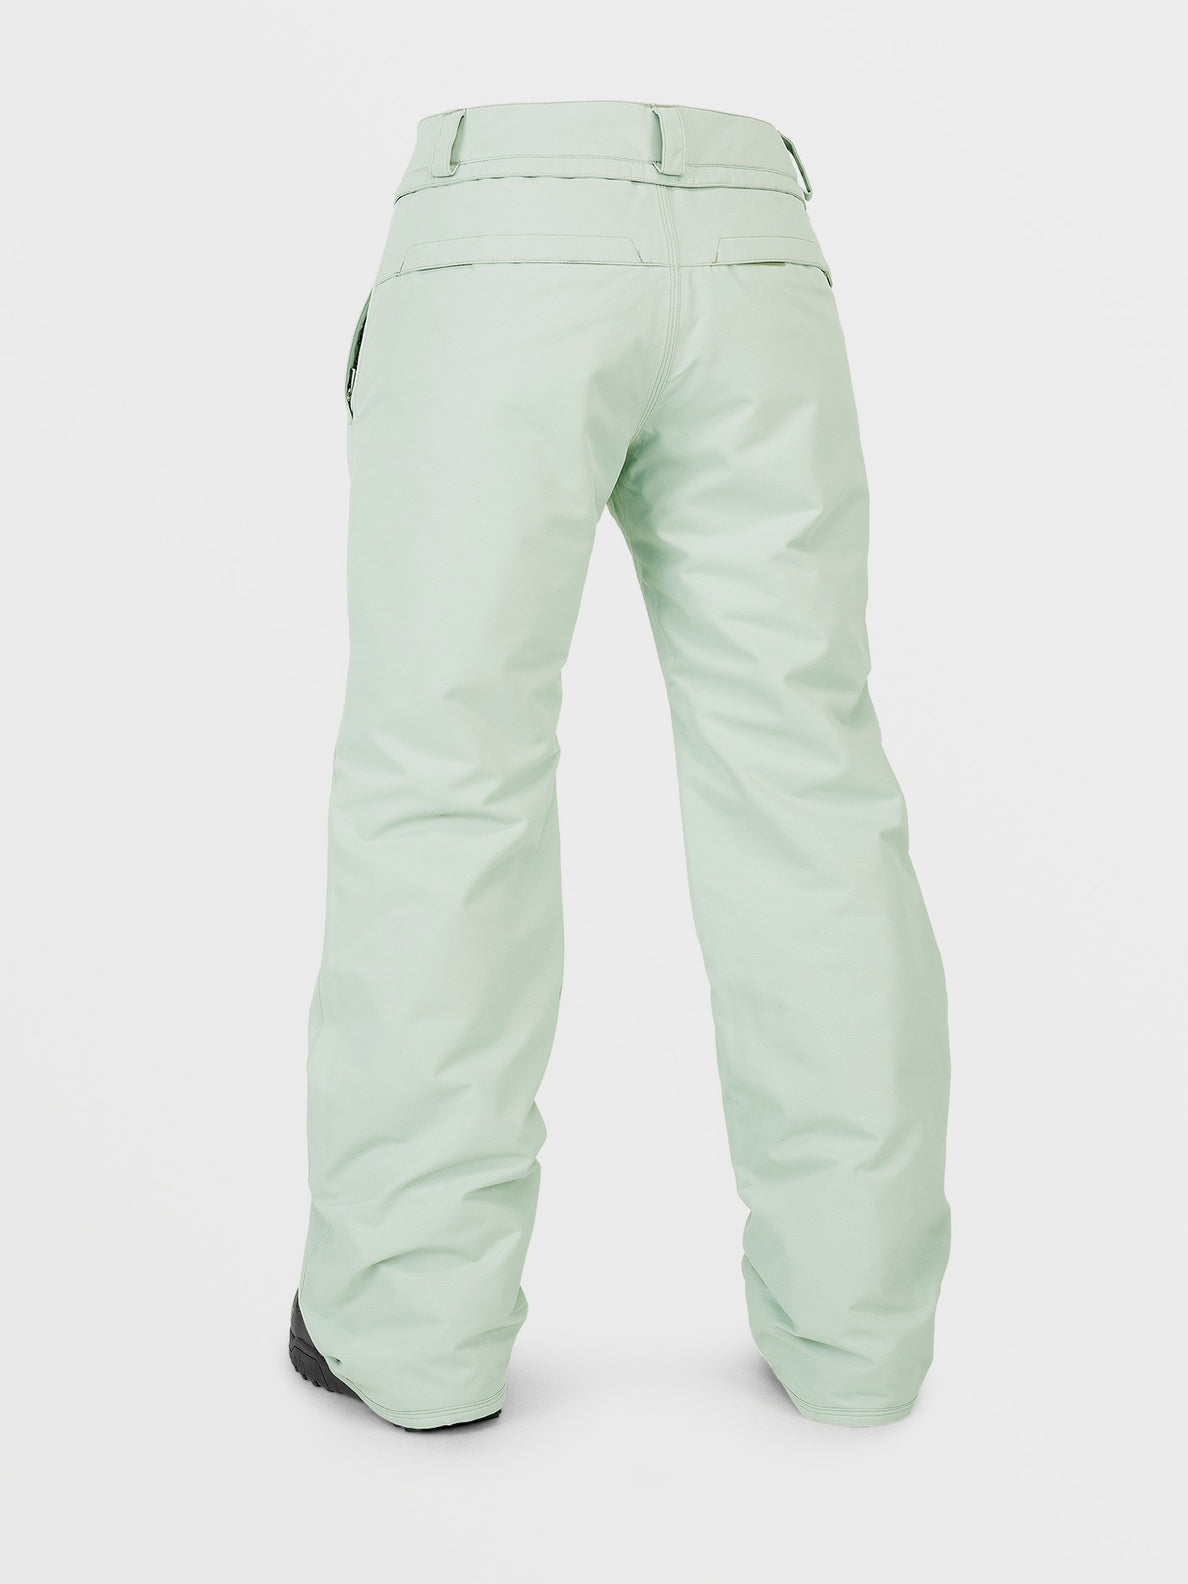 Volcom Women's Frochickie Insulated Snow Pants - Sage Frost